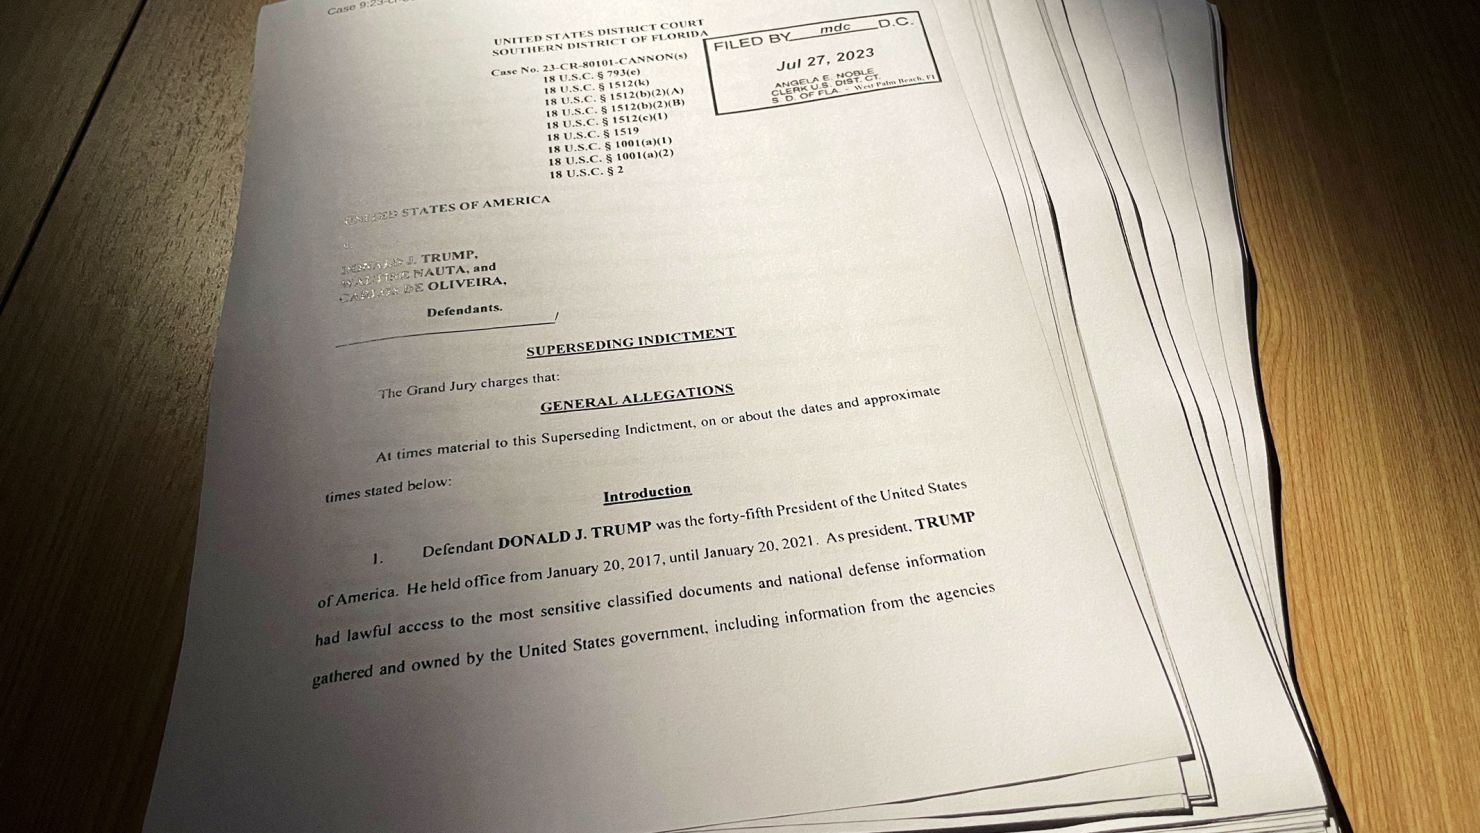 A copy of a superseding indictment is seen in a photo illustration in Washington on July 27, 2023.